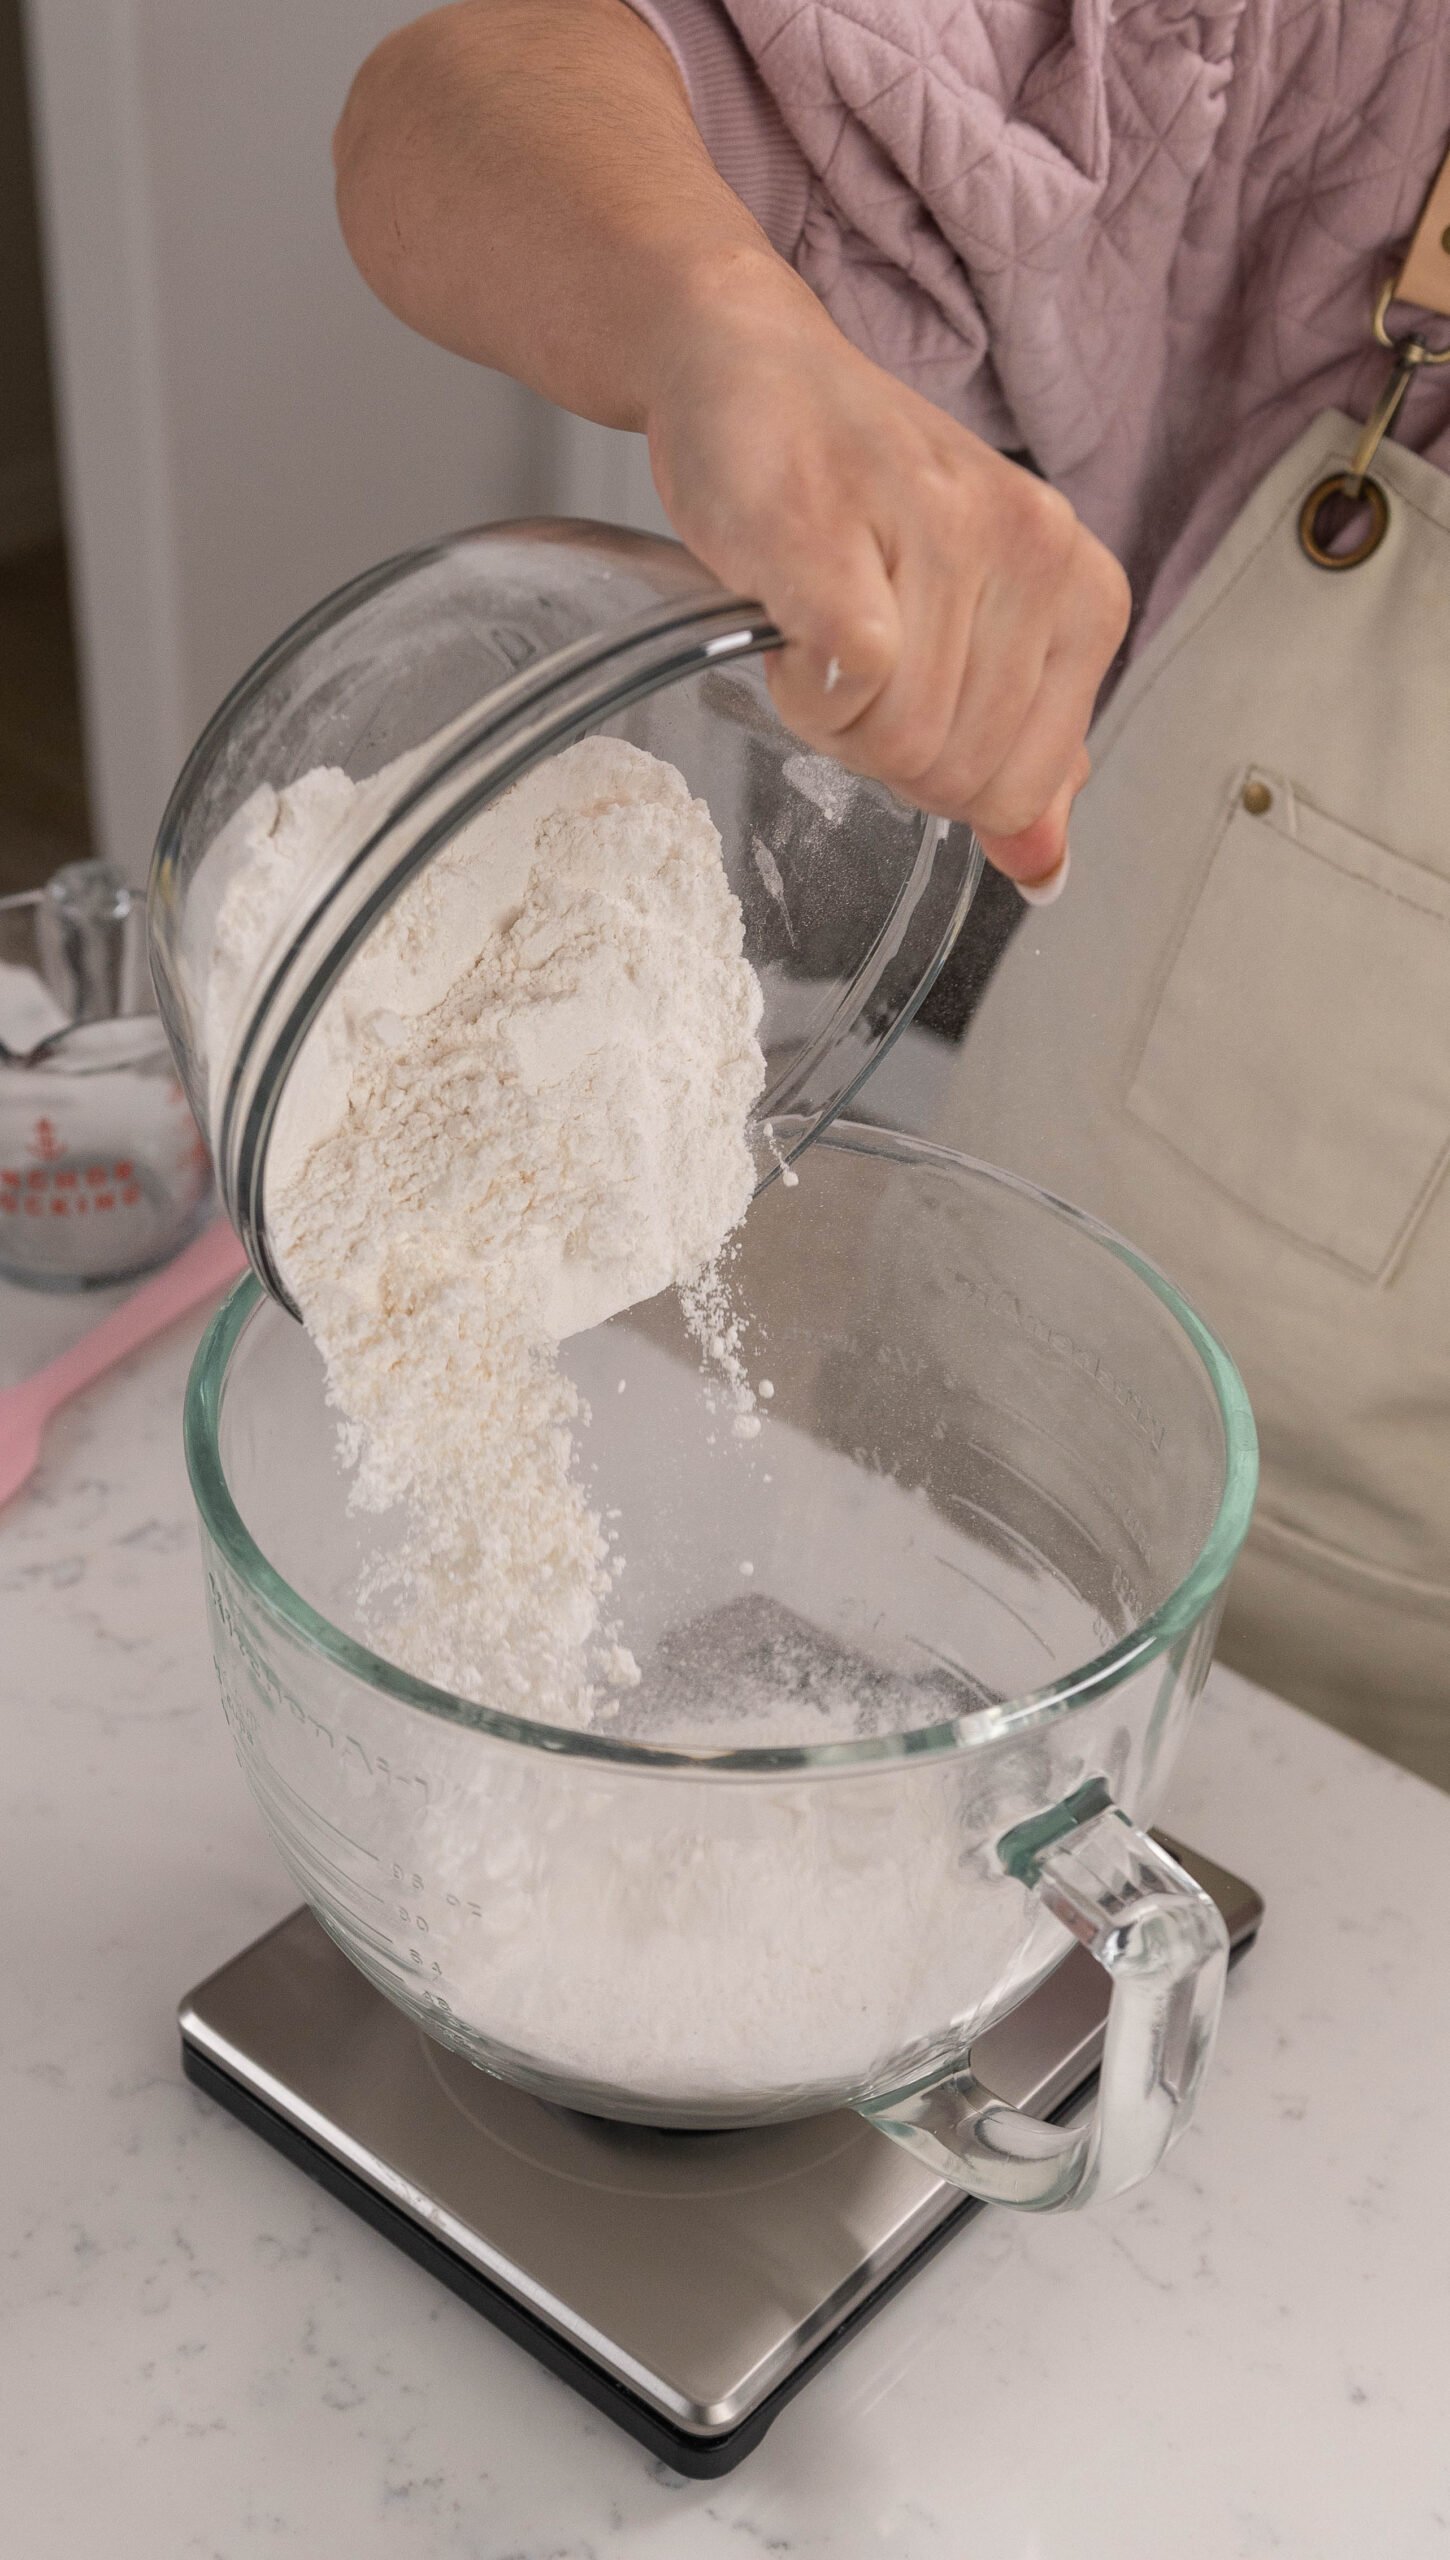 hand pouring bowl of flour into bowl